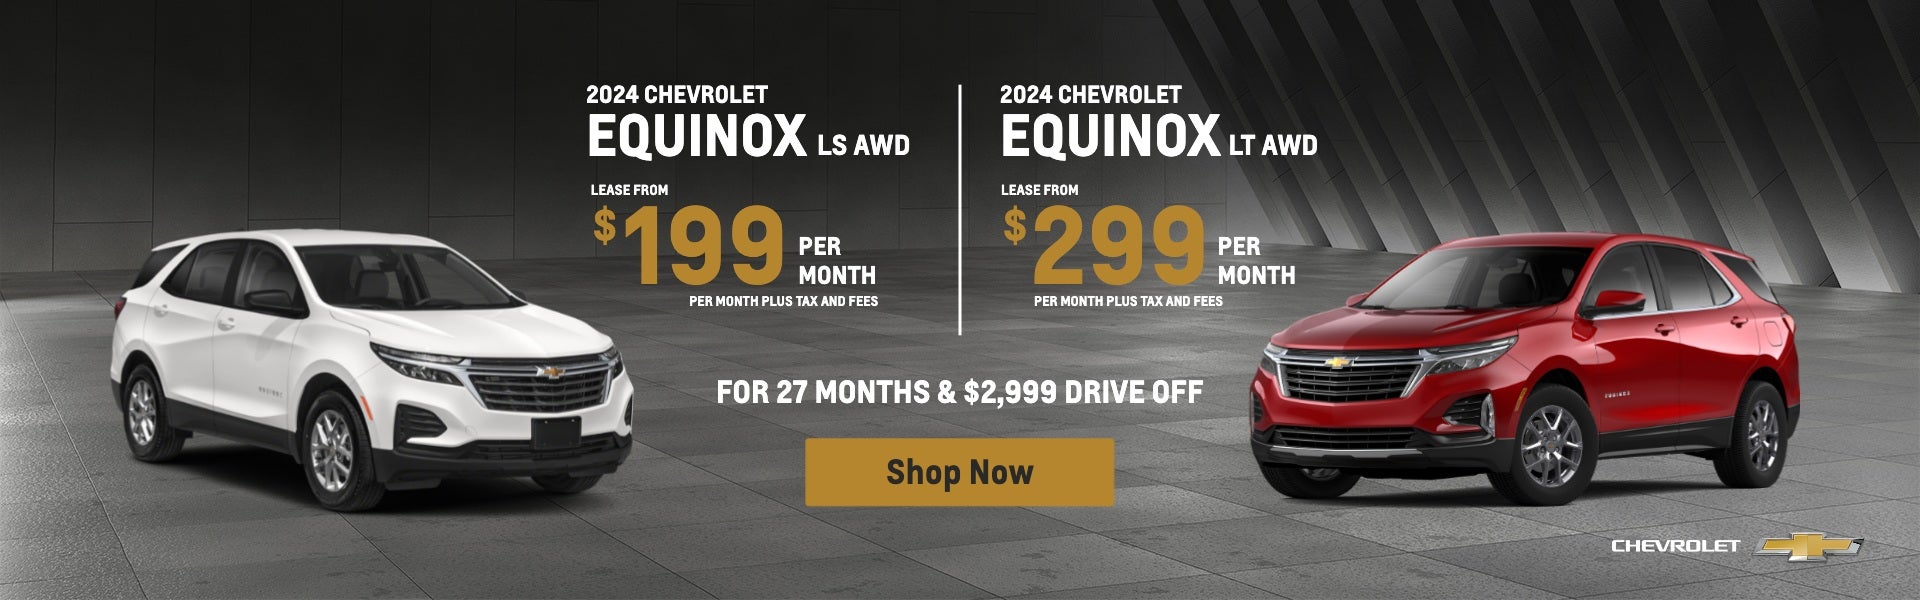 Lease a 2024 Chevy Equinox for as low as 199 per month